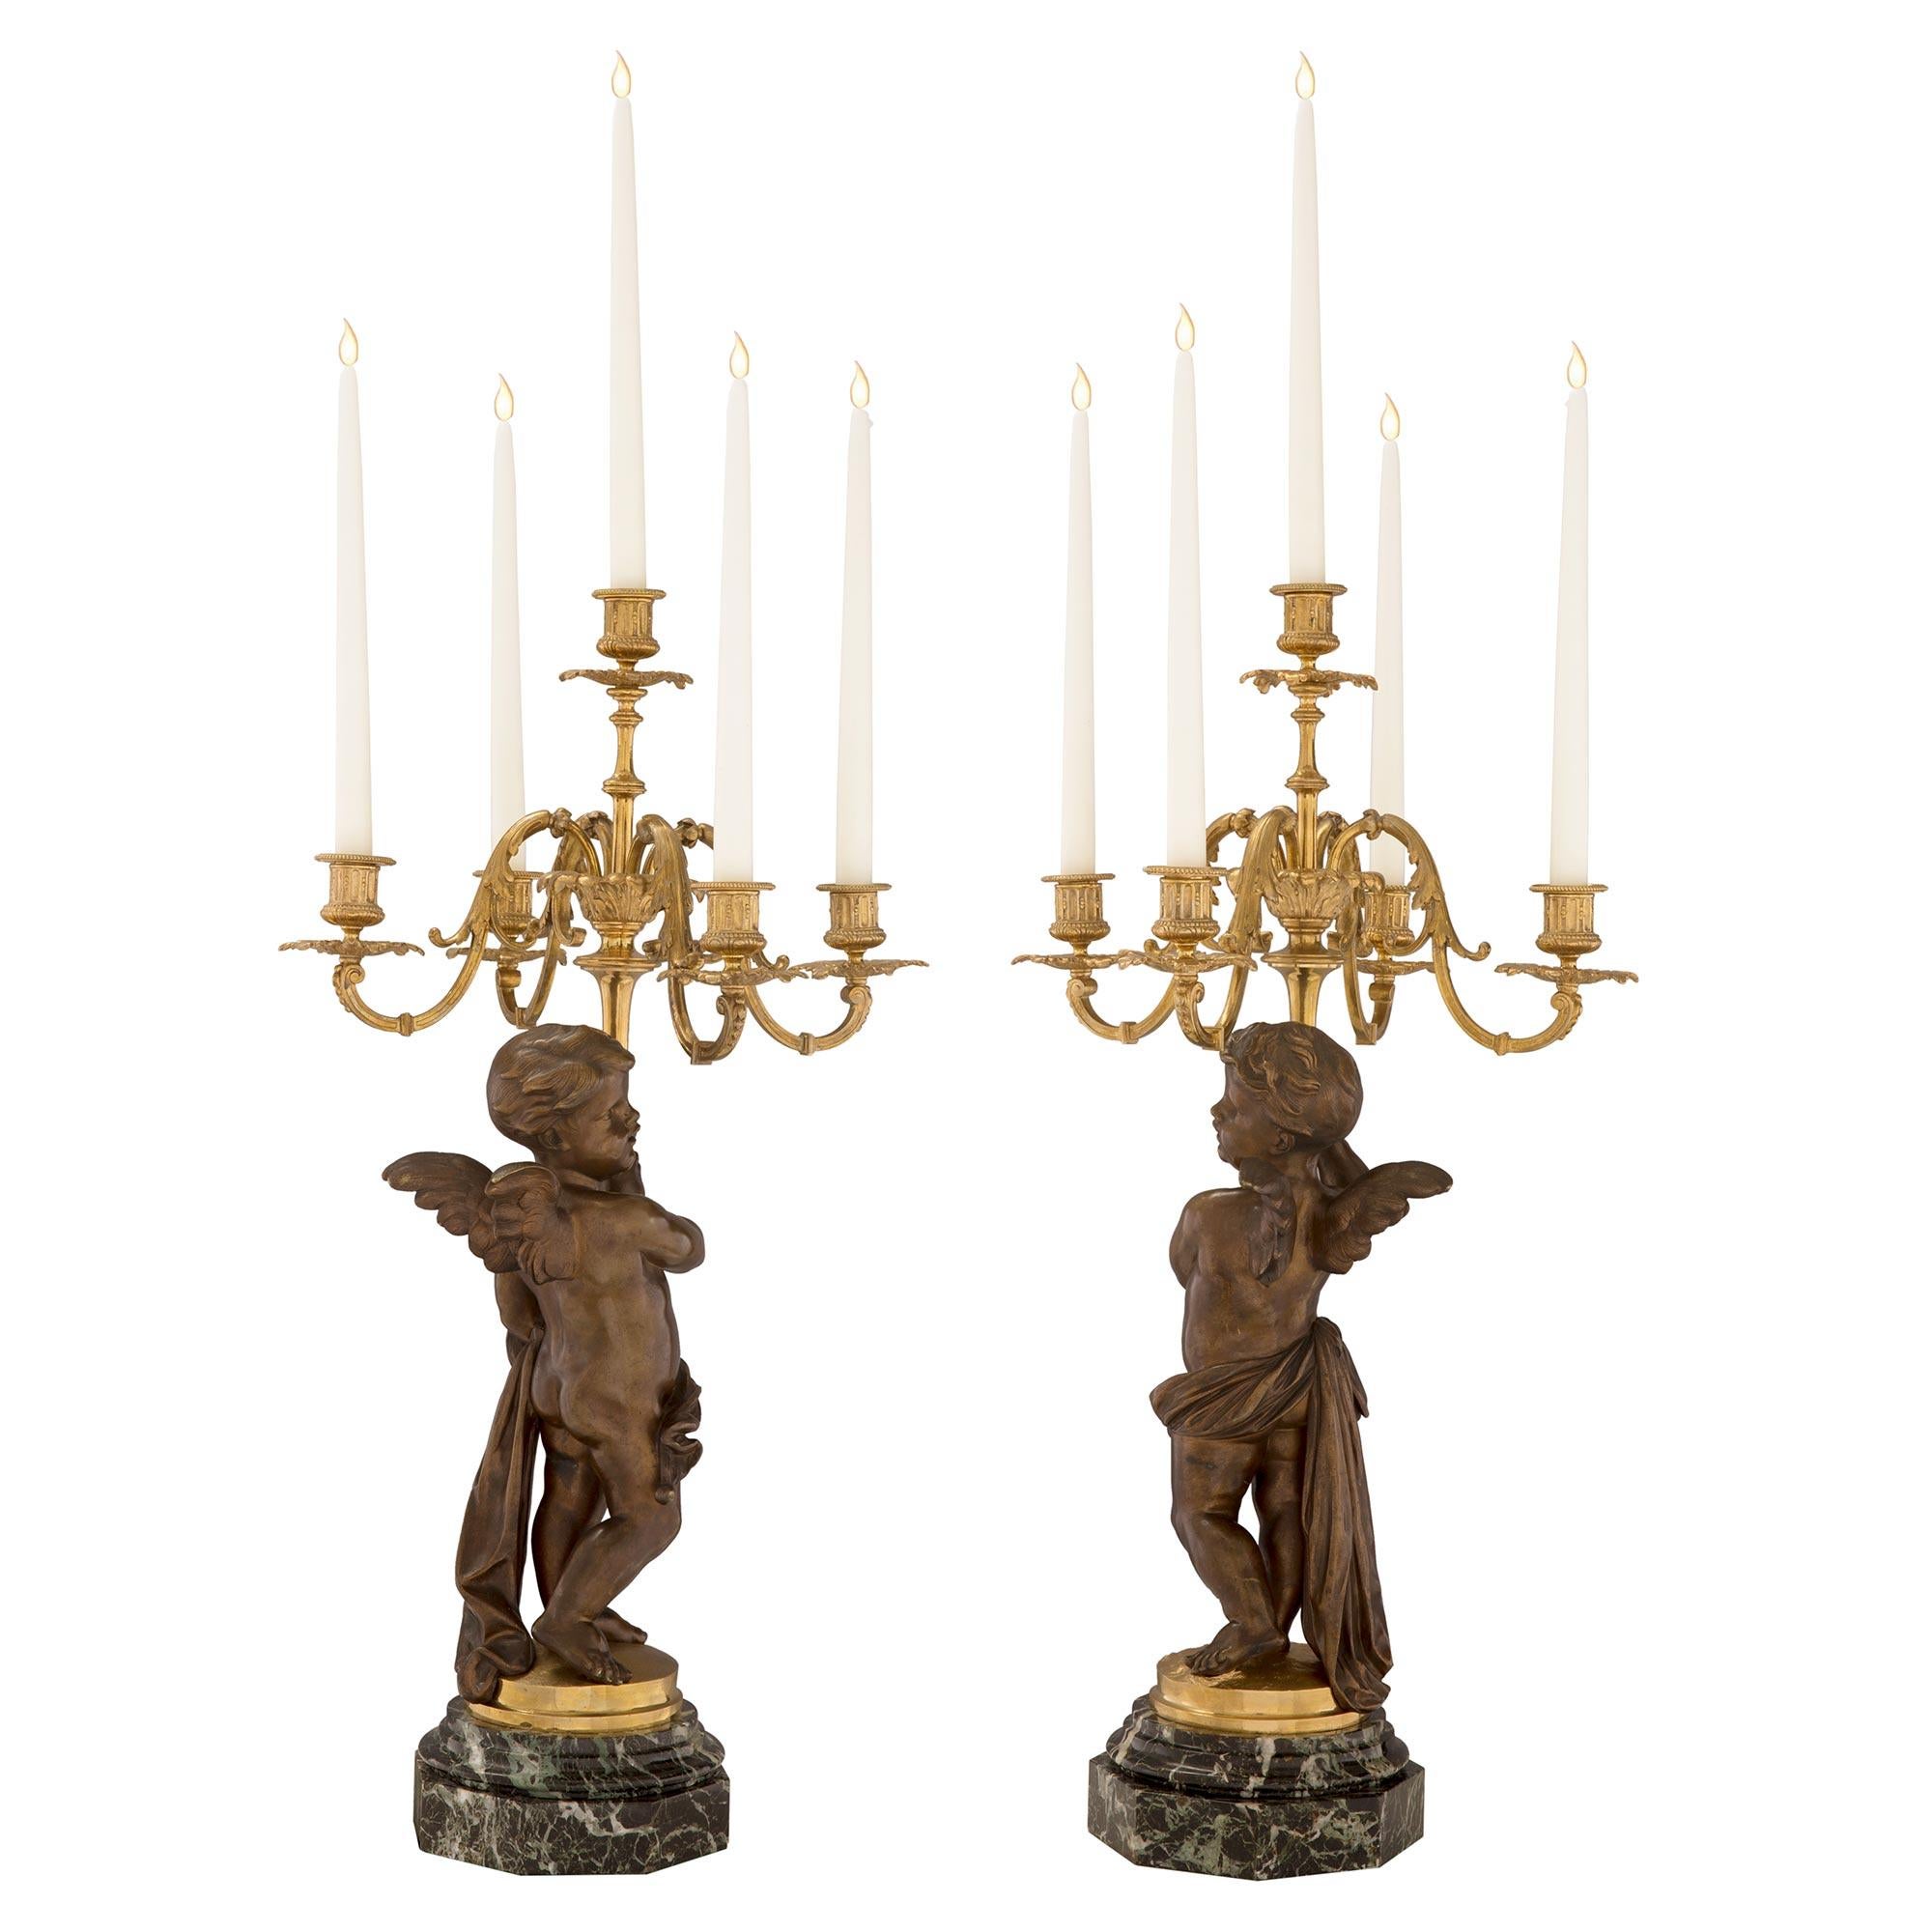 An impressive and most elegant true pair of French mid 19th century Louis XVI st. ormolu, patinated bronze, Vert Antique marble candelabras. Each candelabra is raised by an octagonal shaped Vert Antique marble base with a lovely and most decorative